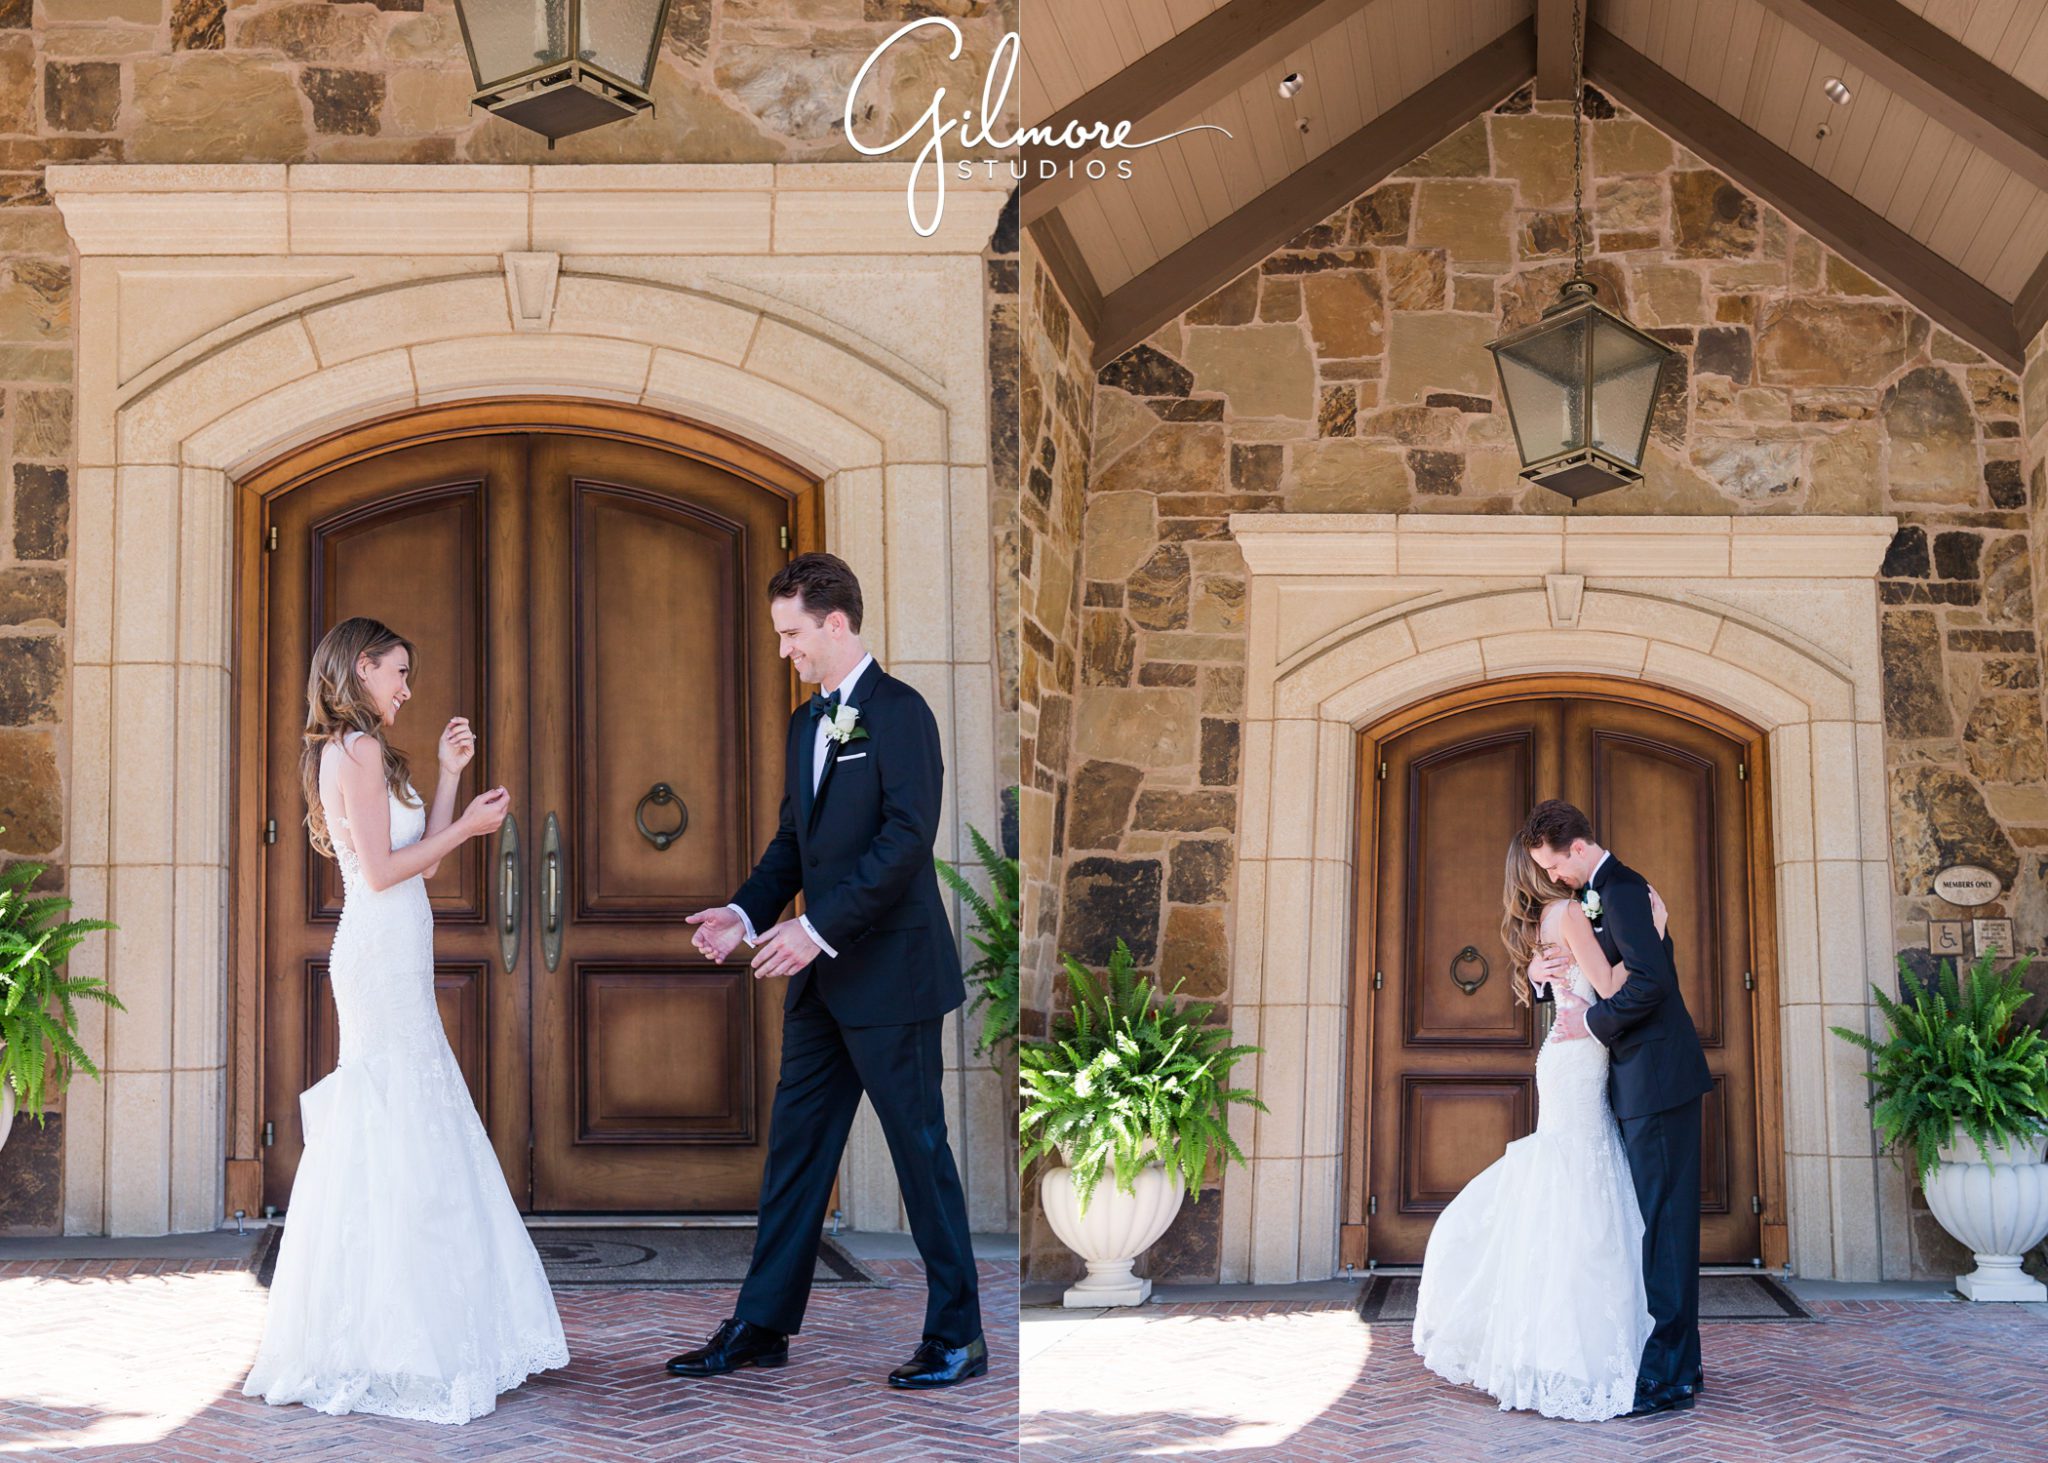 Big Canyon Country Club Wedding, first look, bride and groom, dress, newport beach, tuxedo, outdoor, portrait